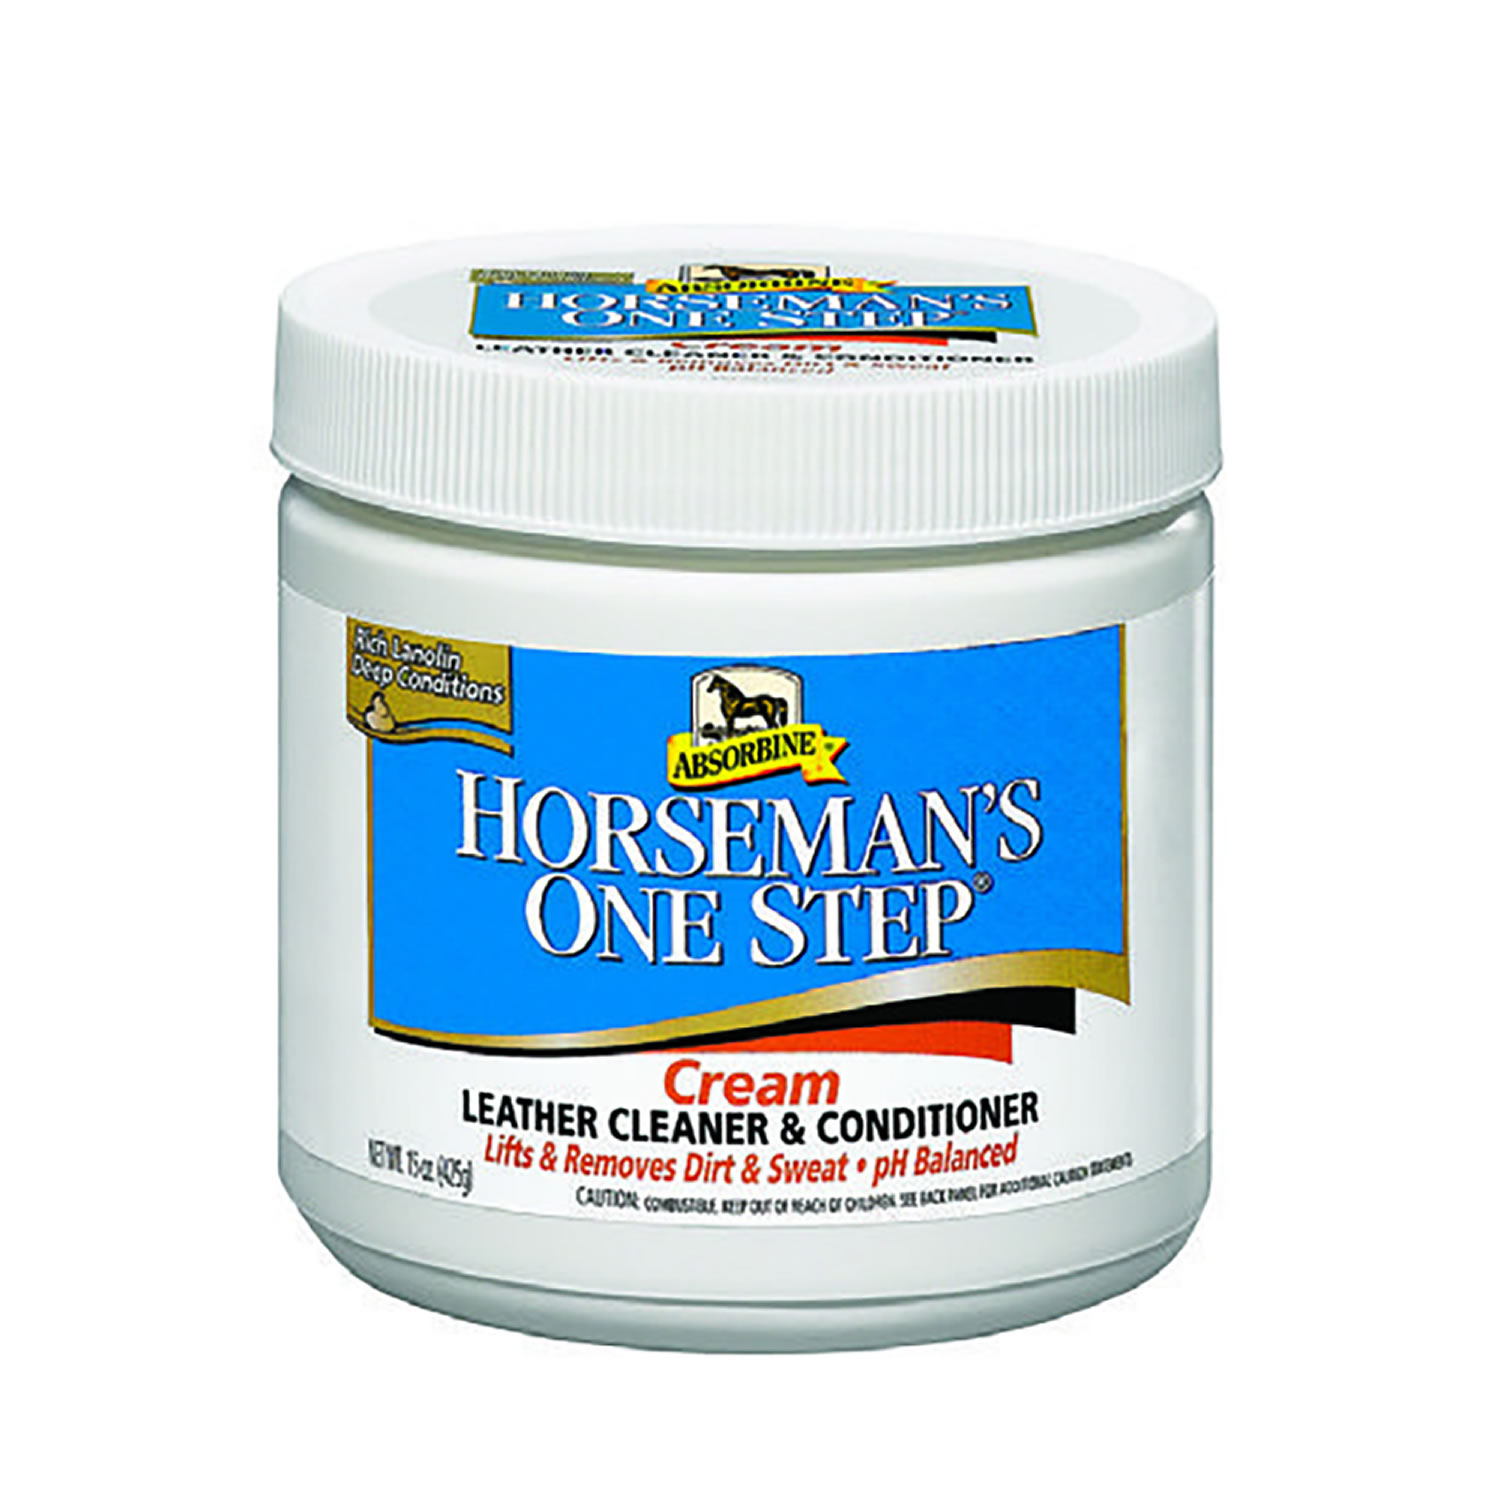 ABSORBINE HORSEMAN'S ONE STEP HARNESS CLEANER ABSORBINE HORSEMAN'S ONE STEP HARNESS CLEANER 425 GM  425 GM